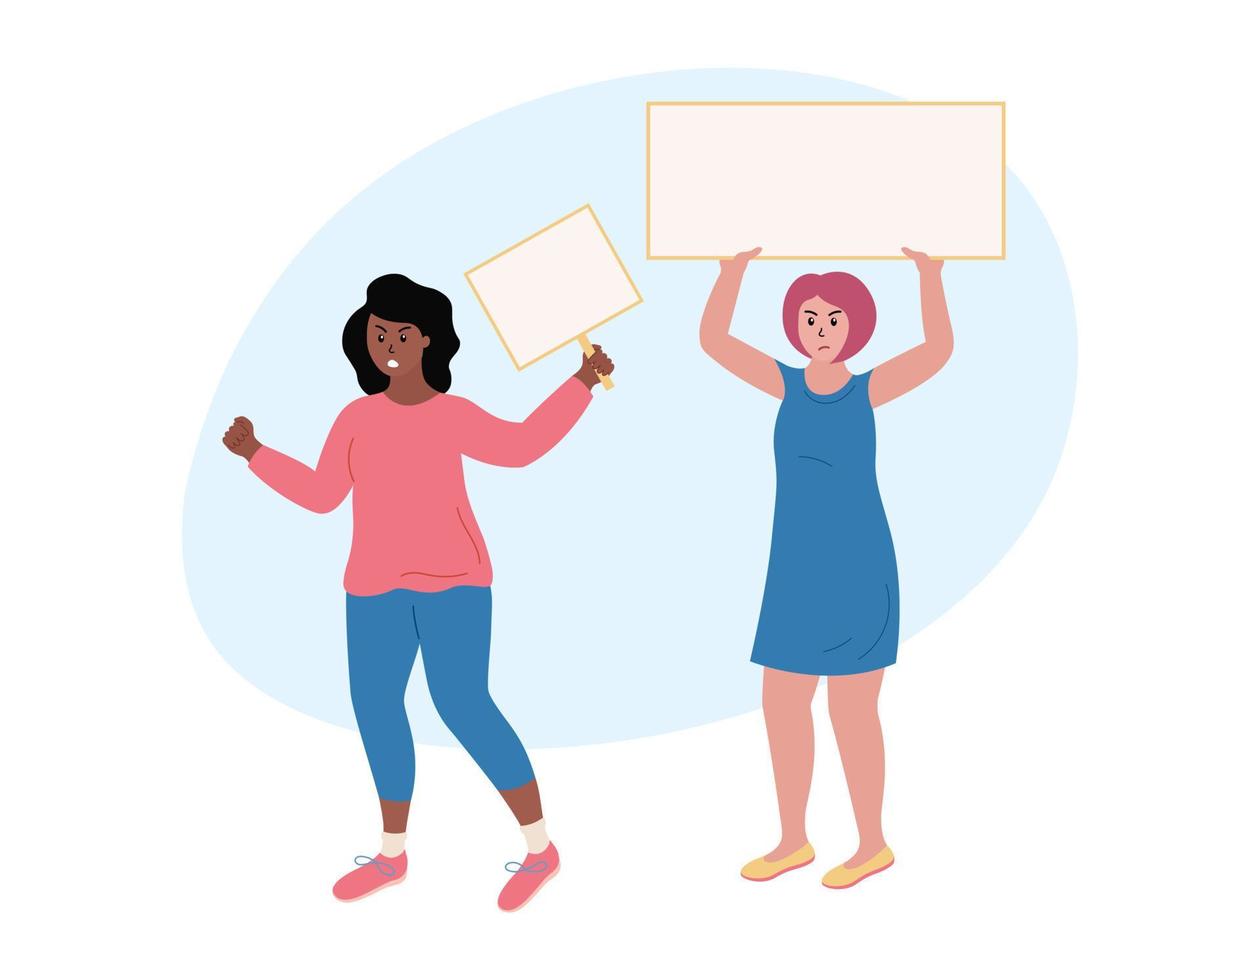 Women protest. Demonstration with placards templates. Angry girls holding blank protest posters in hands. African american woman shoutes and raises fist. Flat vector illustration